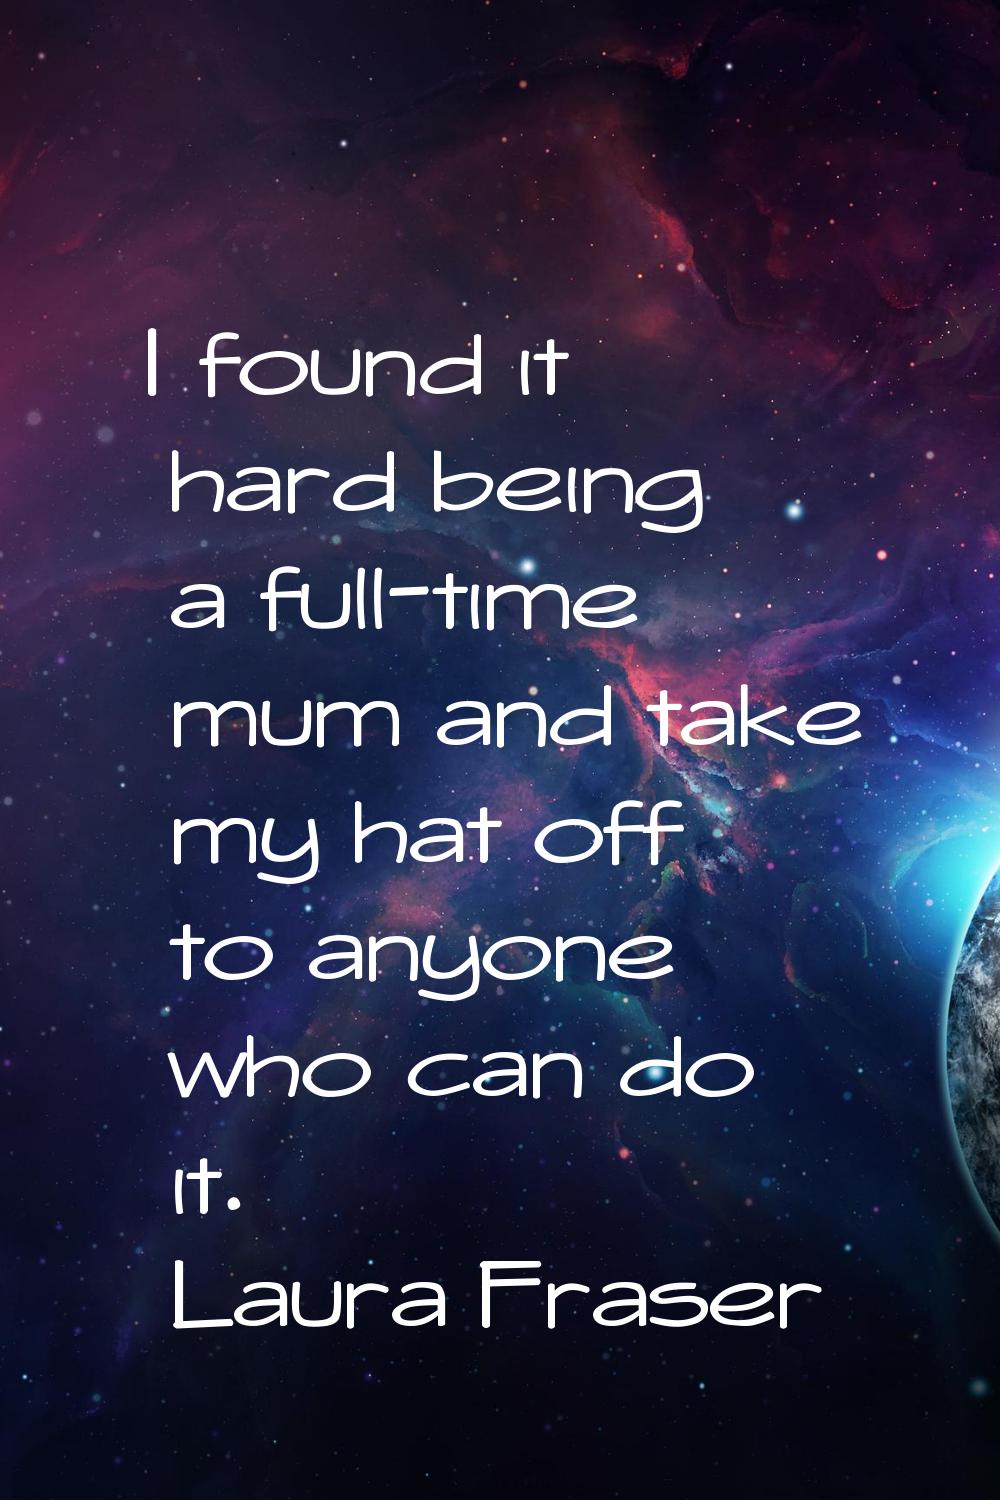 I found it hard being a full-time mum and take my hat off to anyone who can do it.